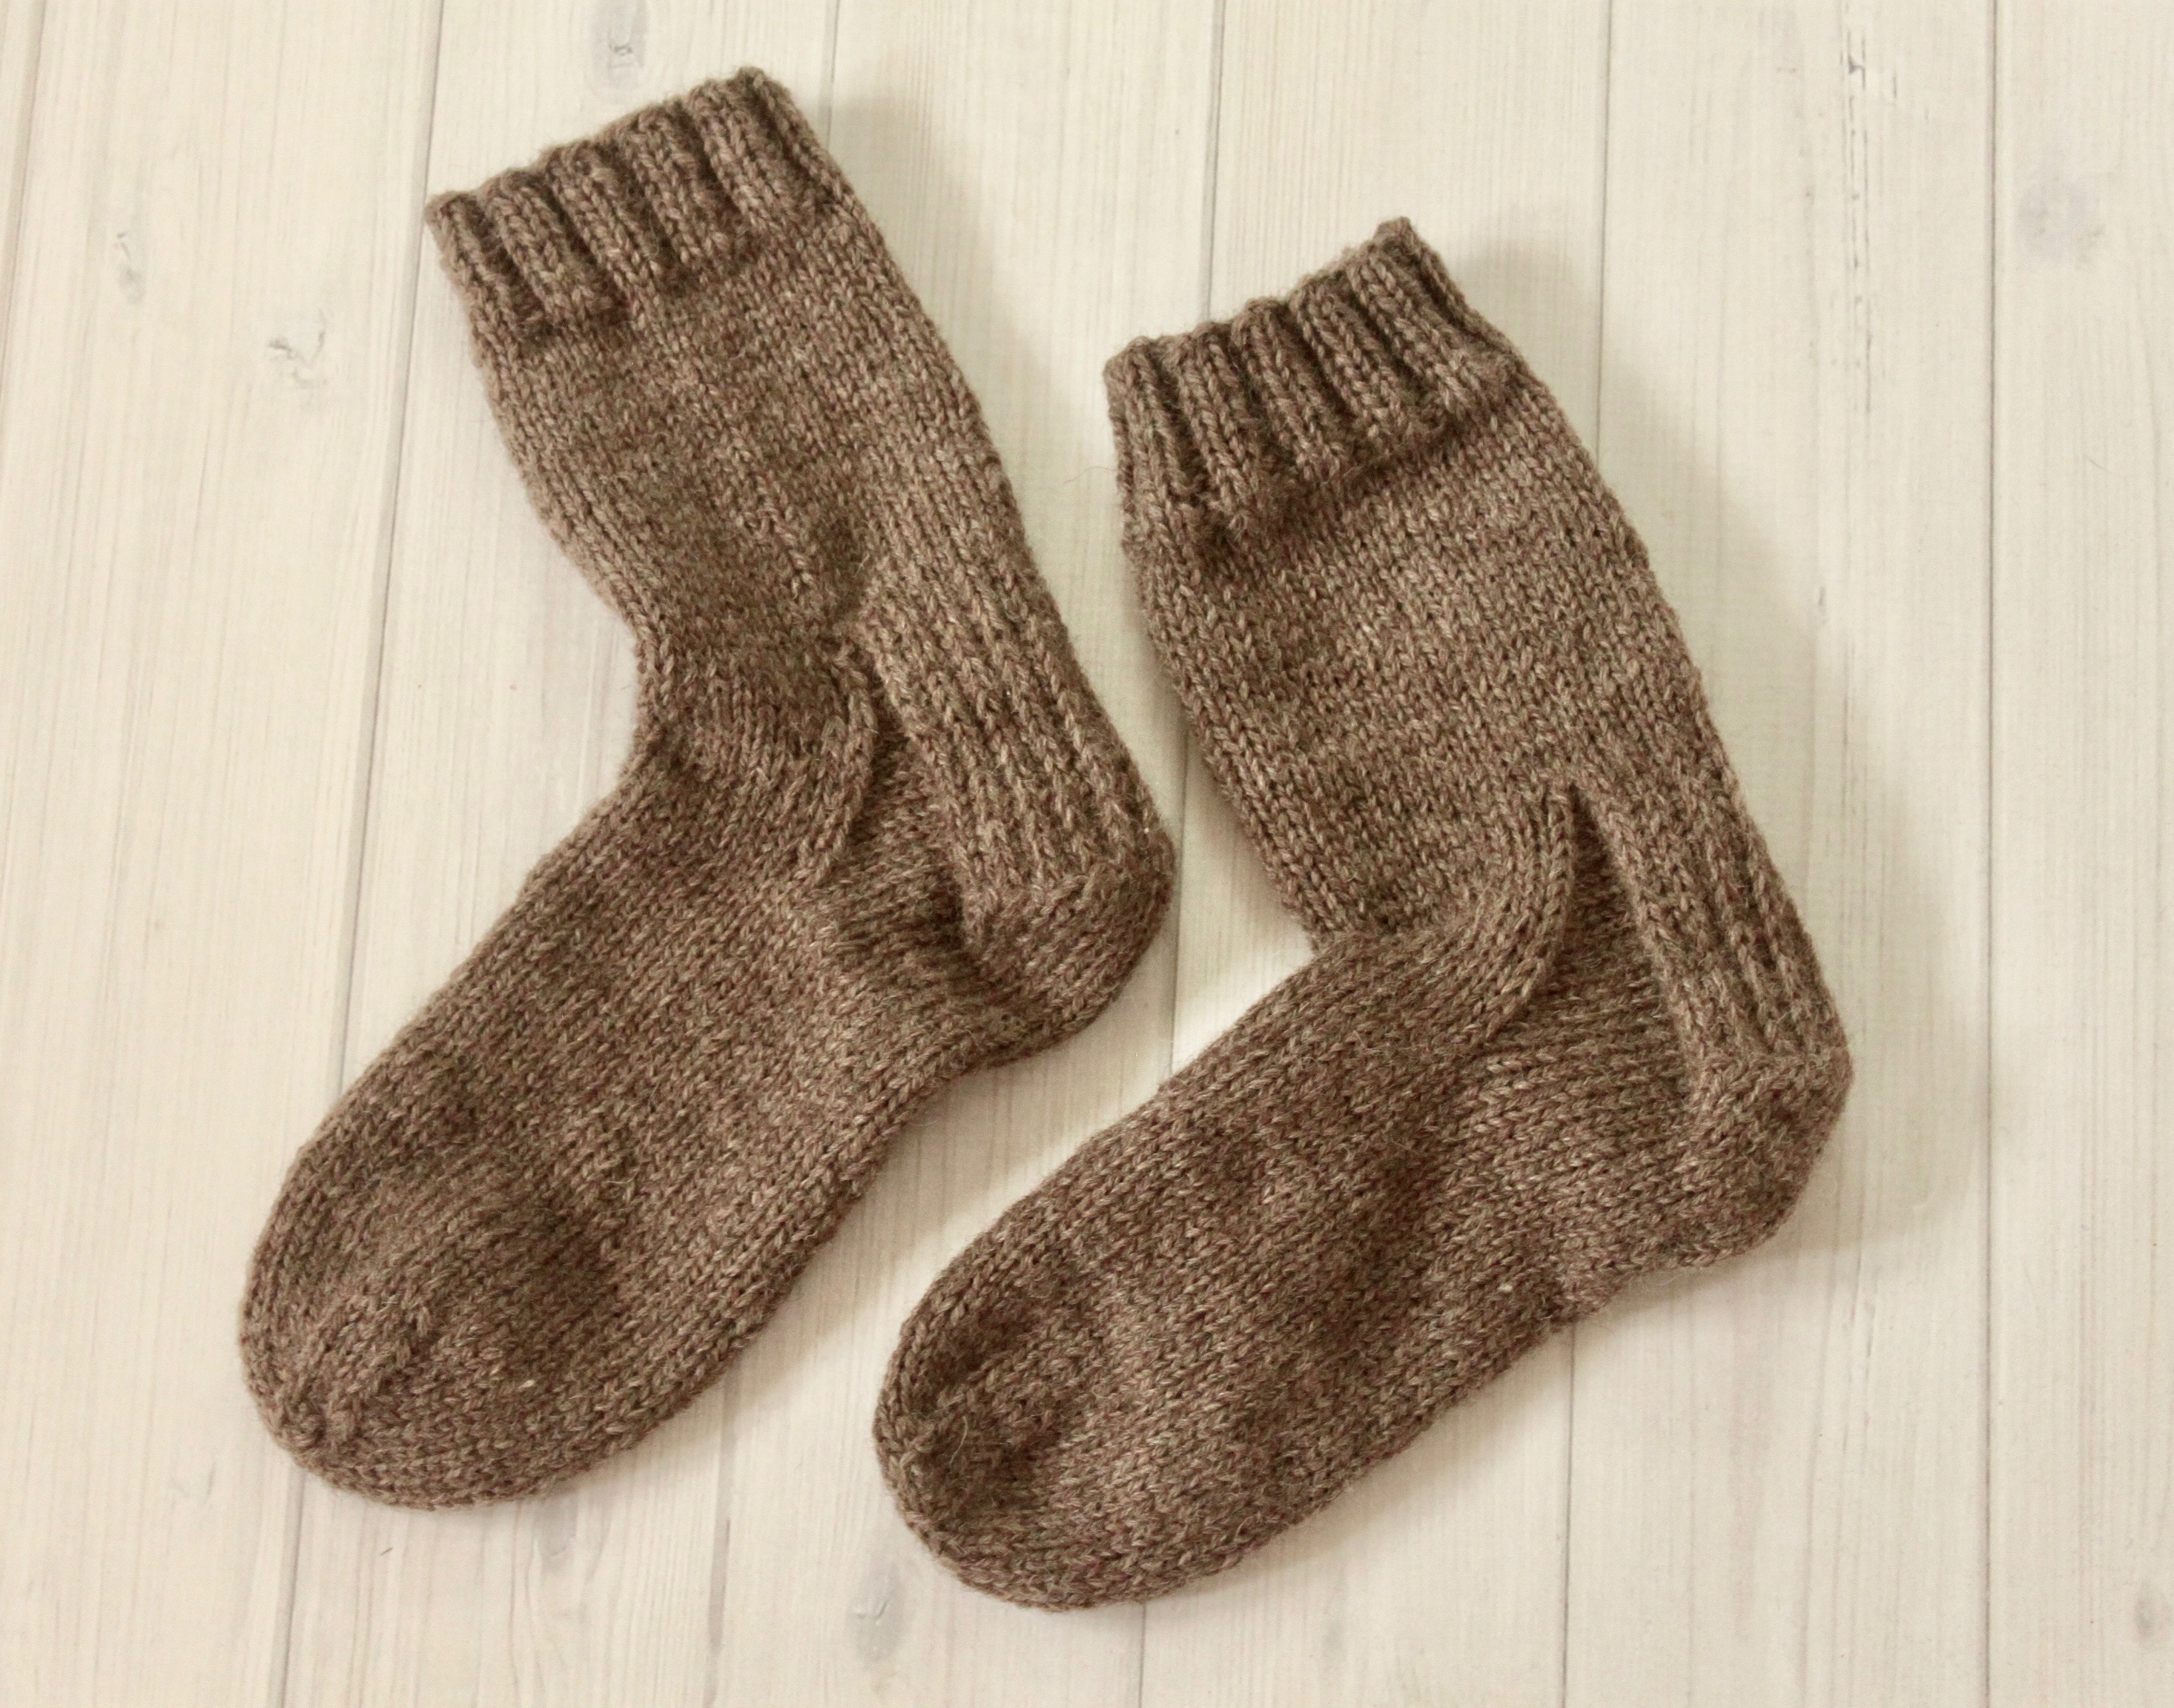 Knitting Socks For the First Time - Artisan in the Woods